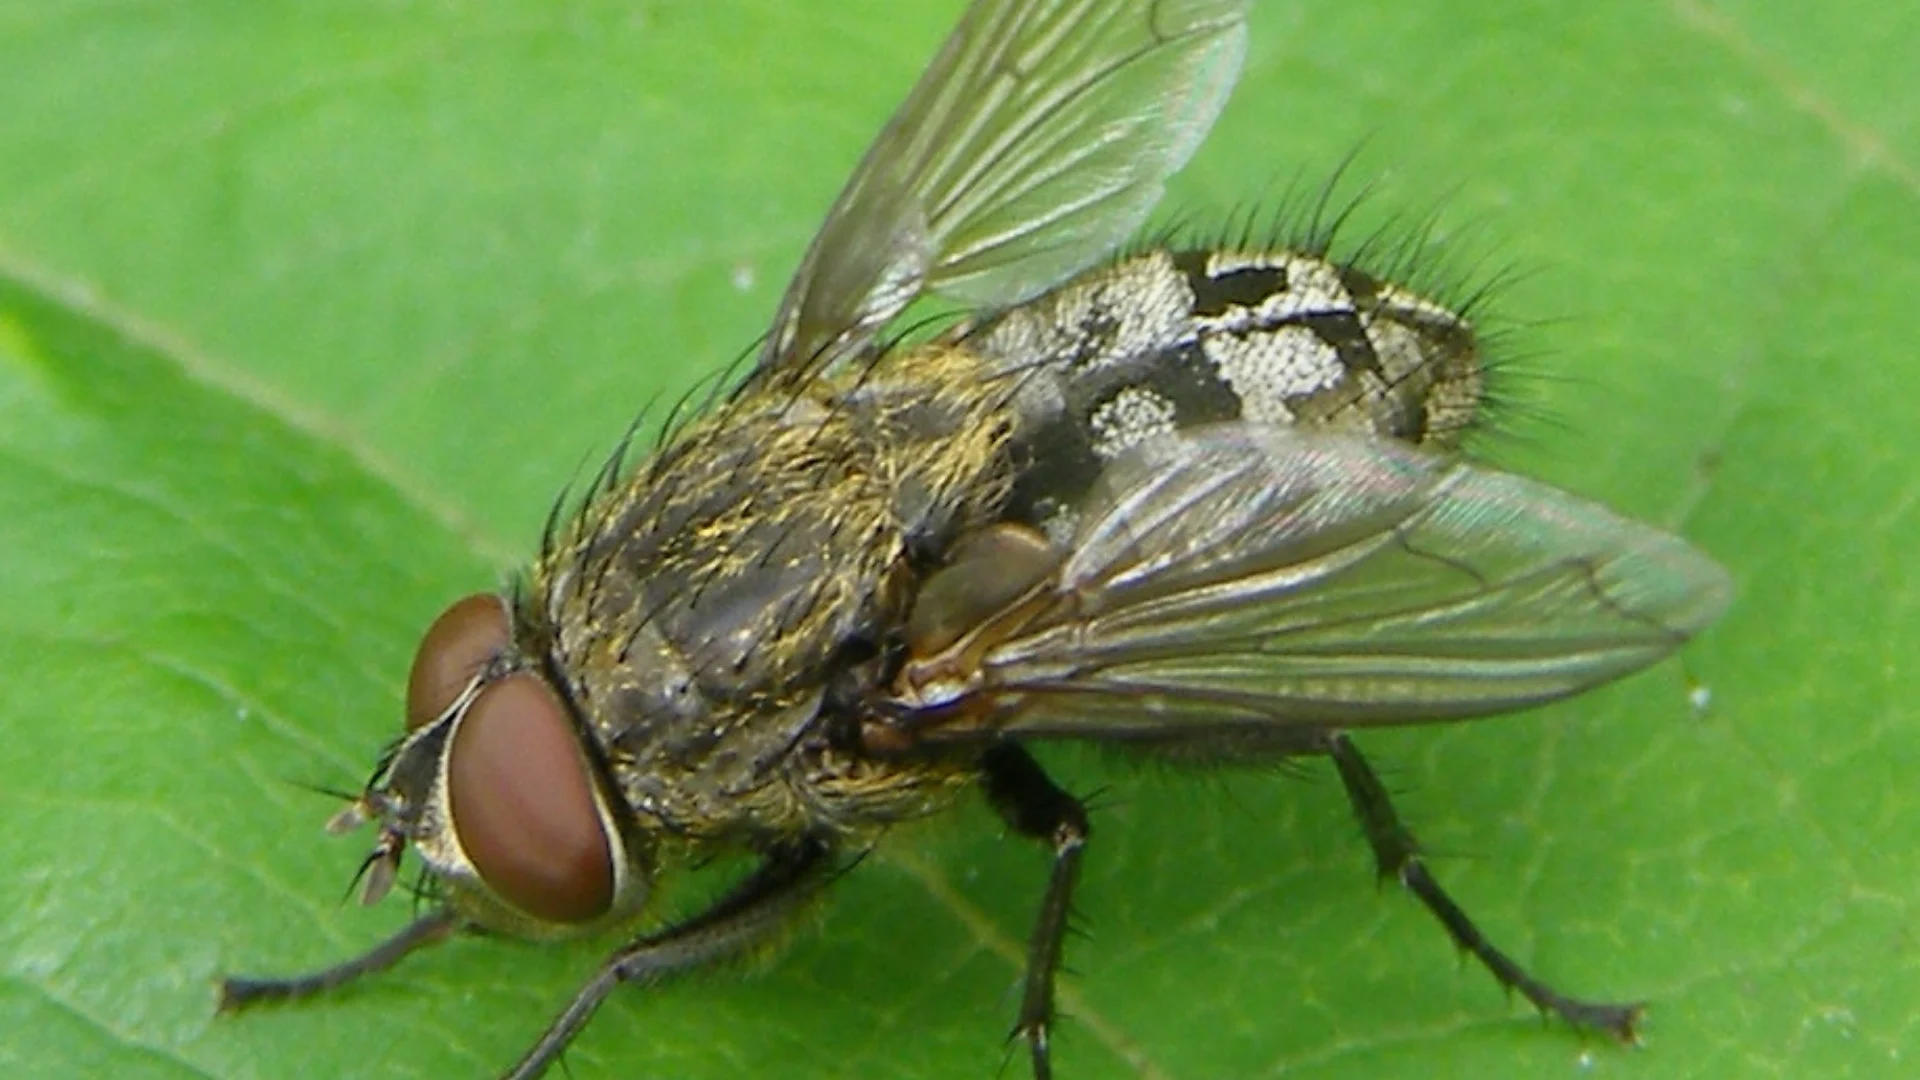 Meet the fly that emits an odour, leaves stains, and clusters in homes in fall